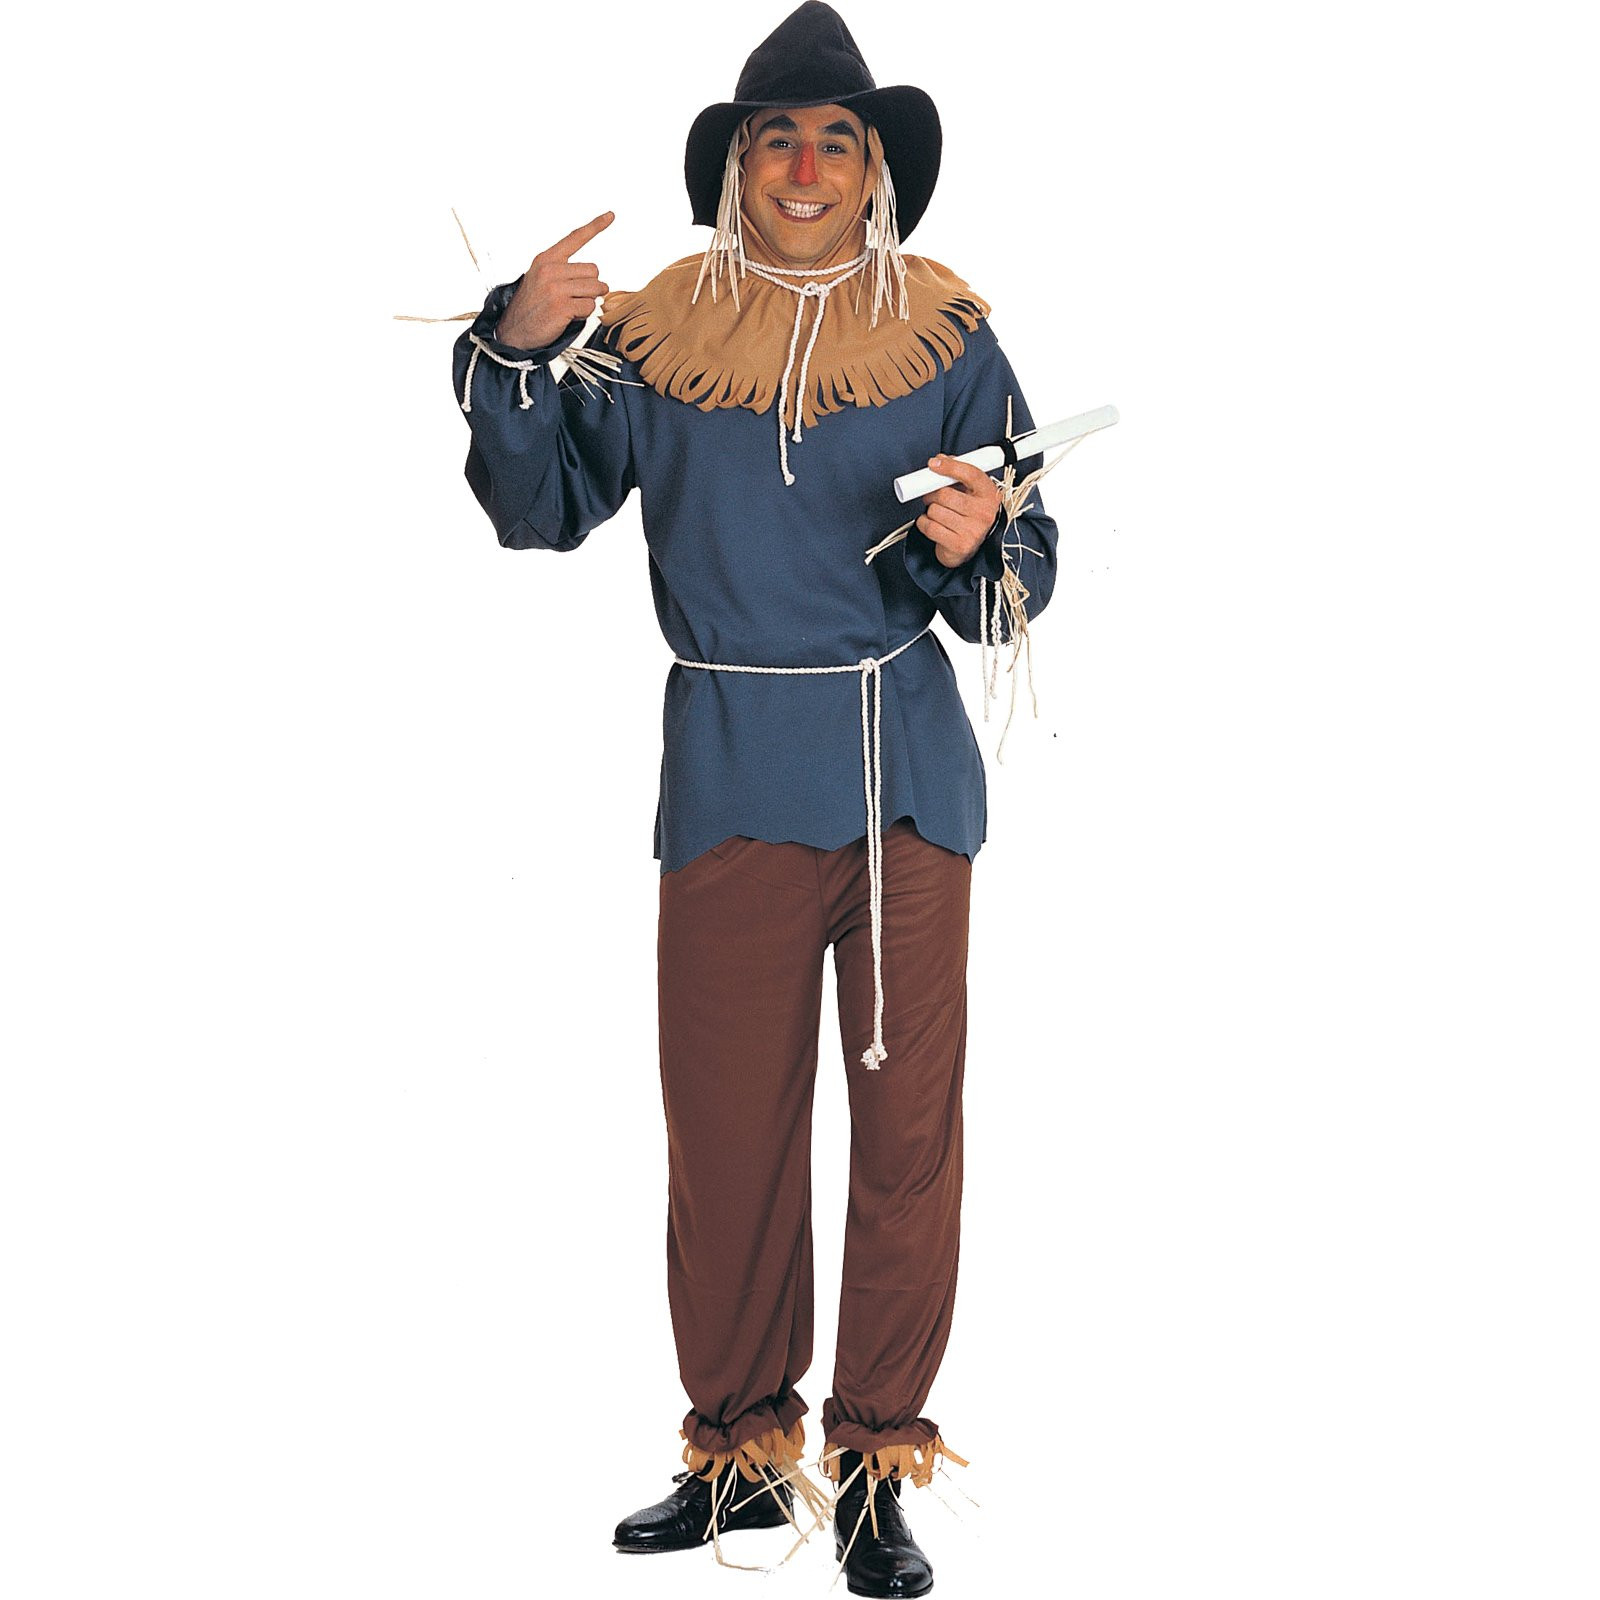 DIY Scarecrow Costume Wizard Of Oz
 Creative Pursuits The Wizard of Oz